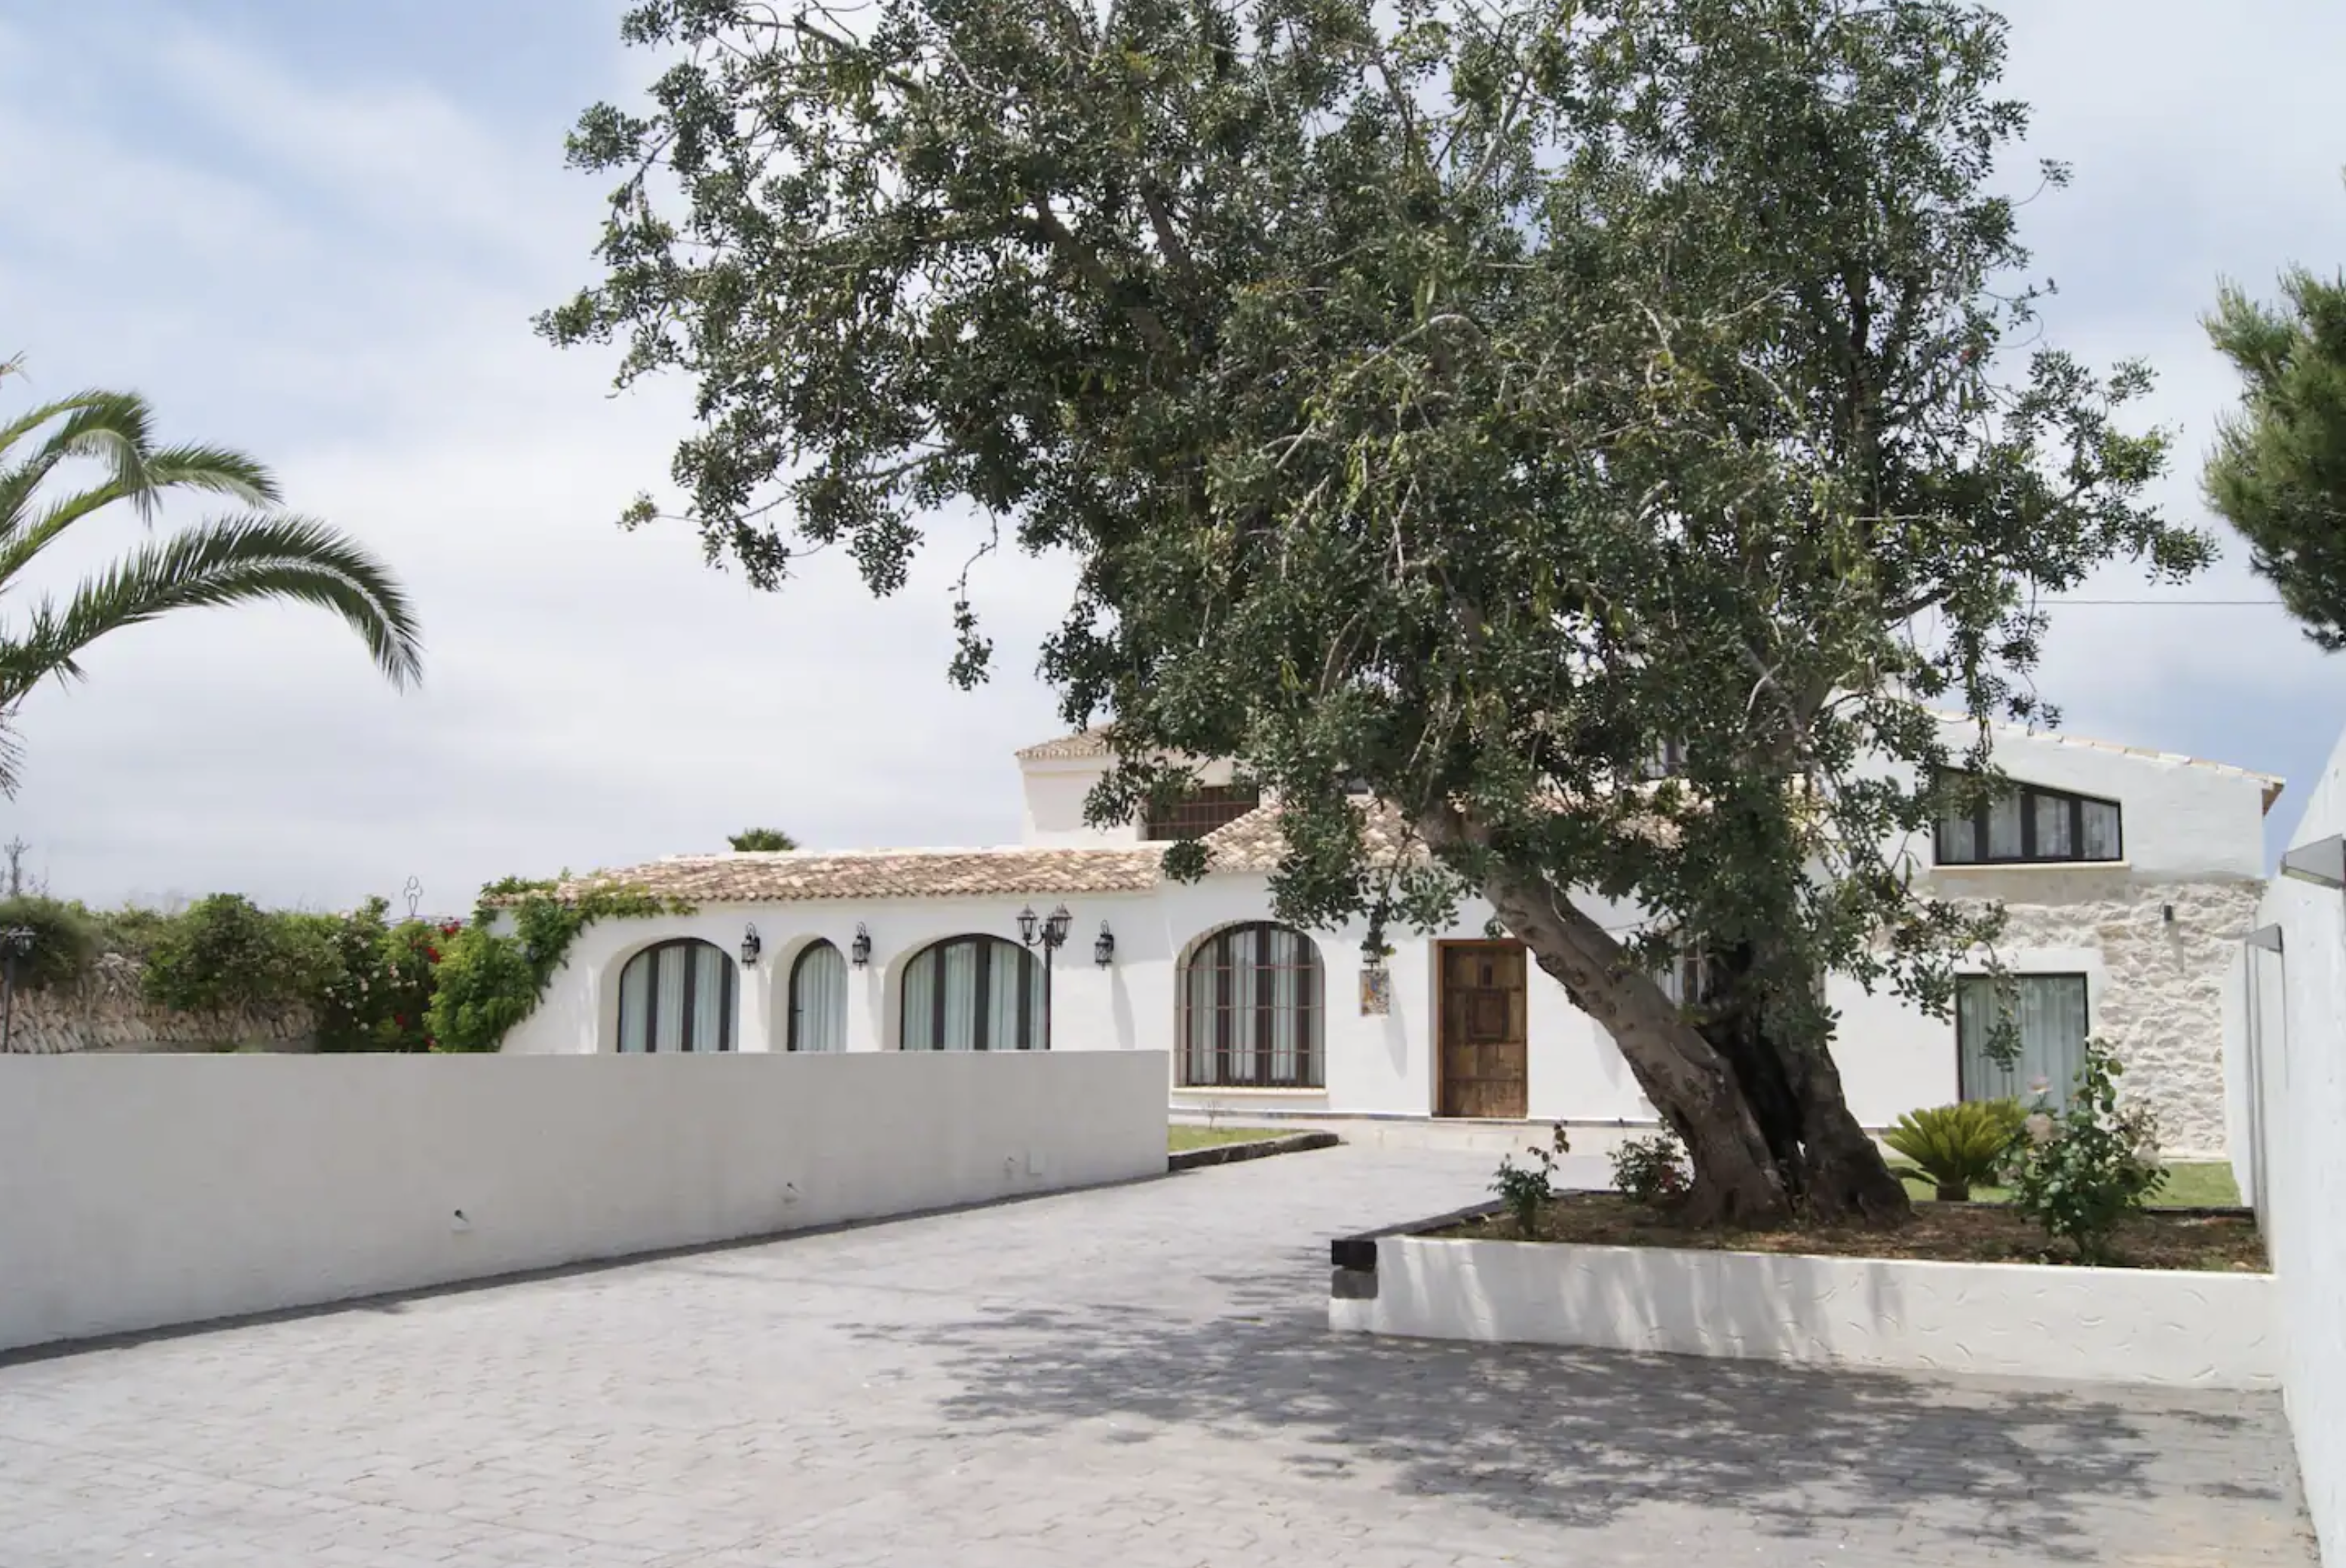 White Vila with an Olive tree